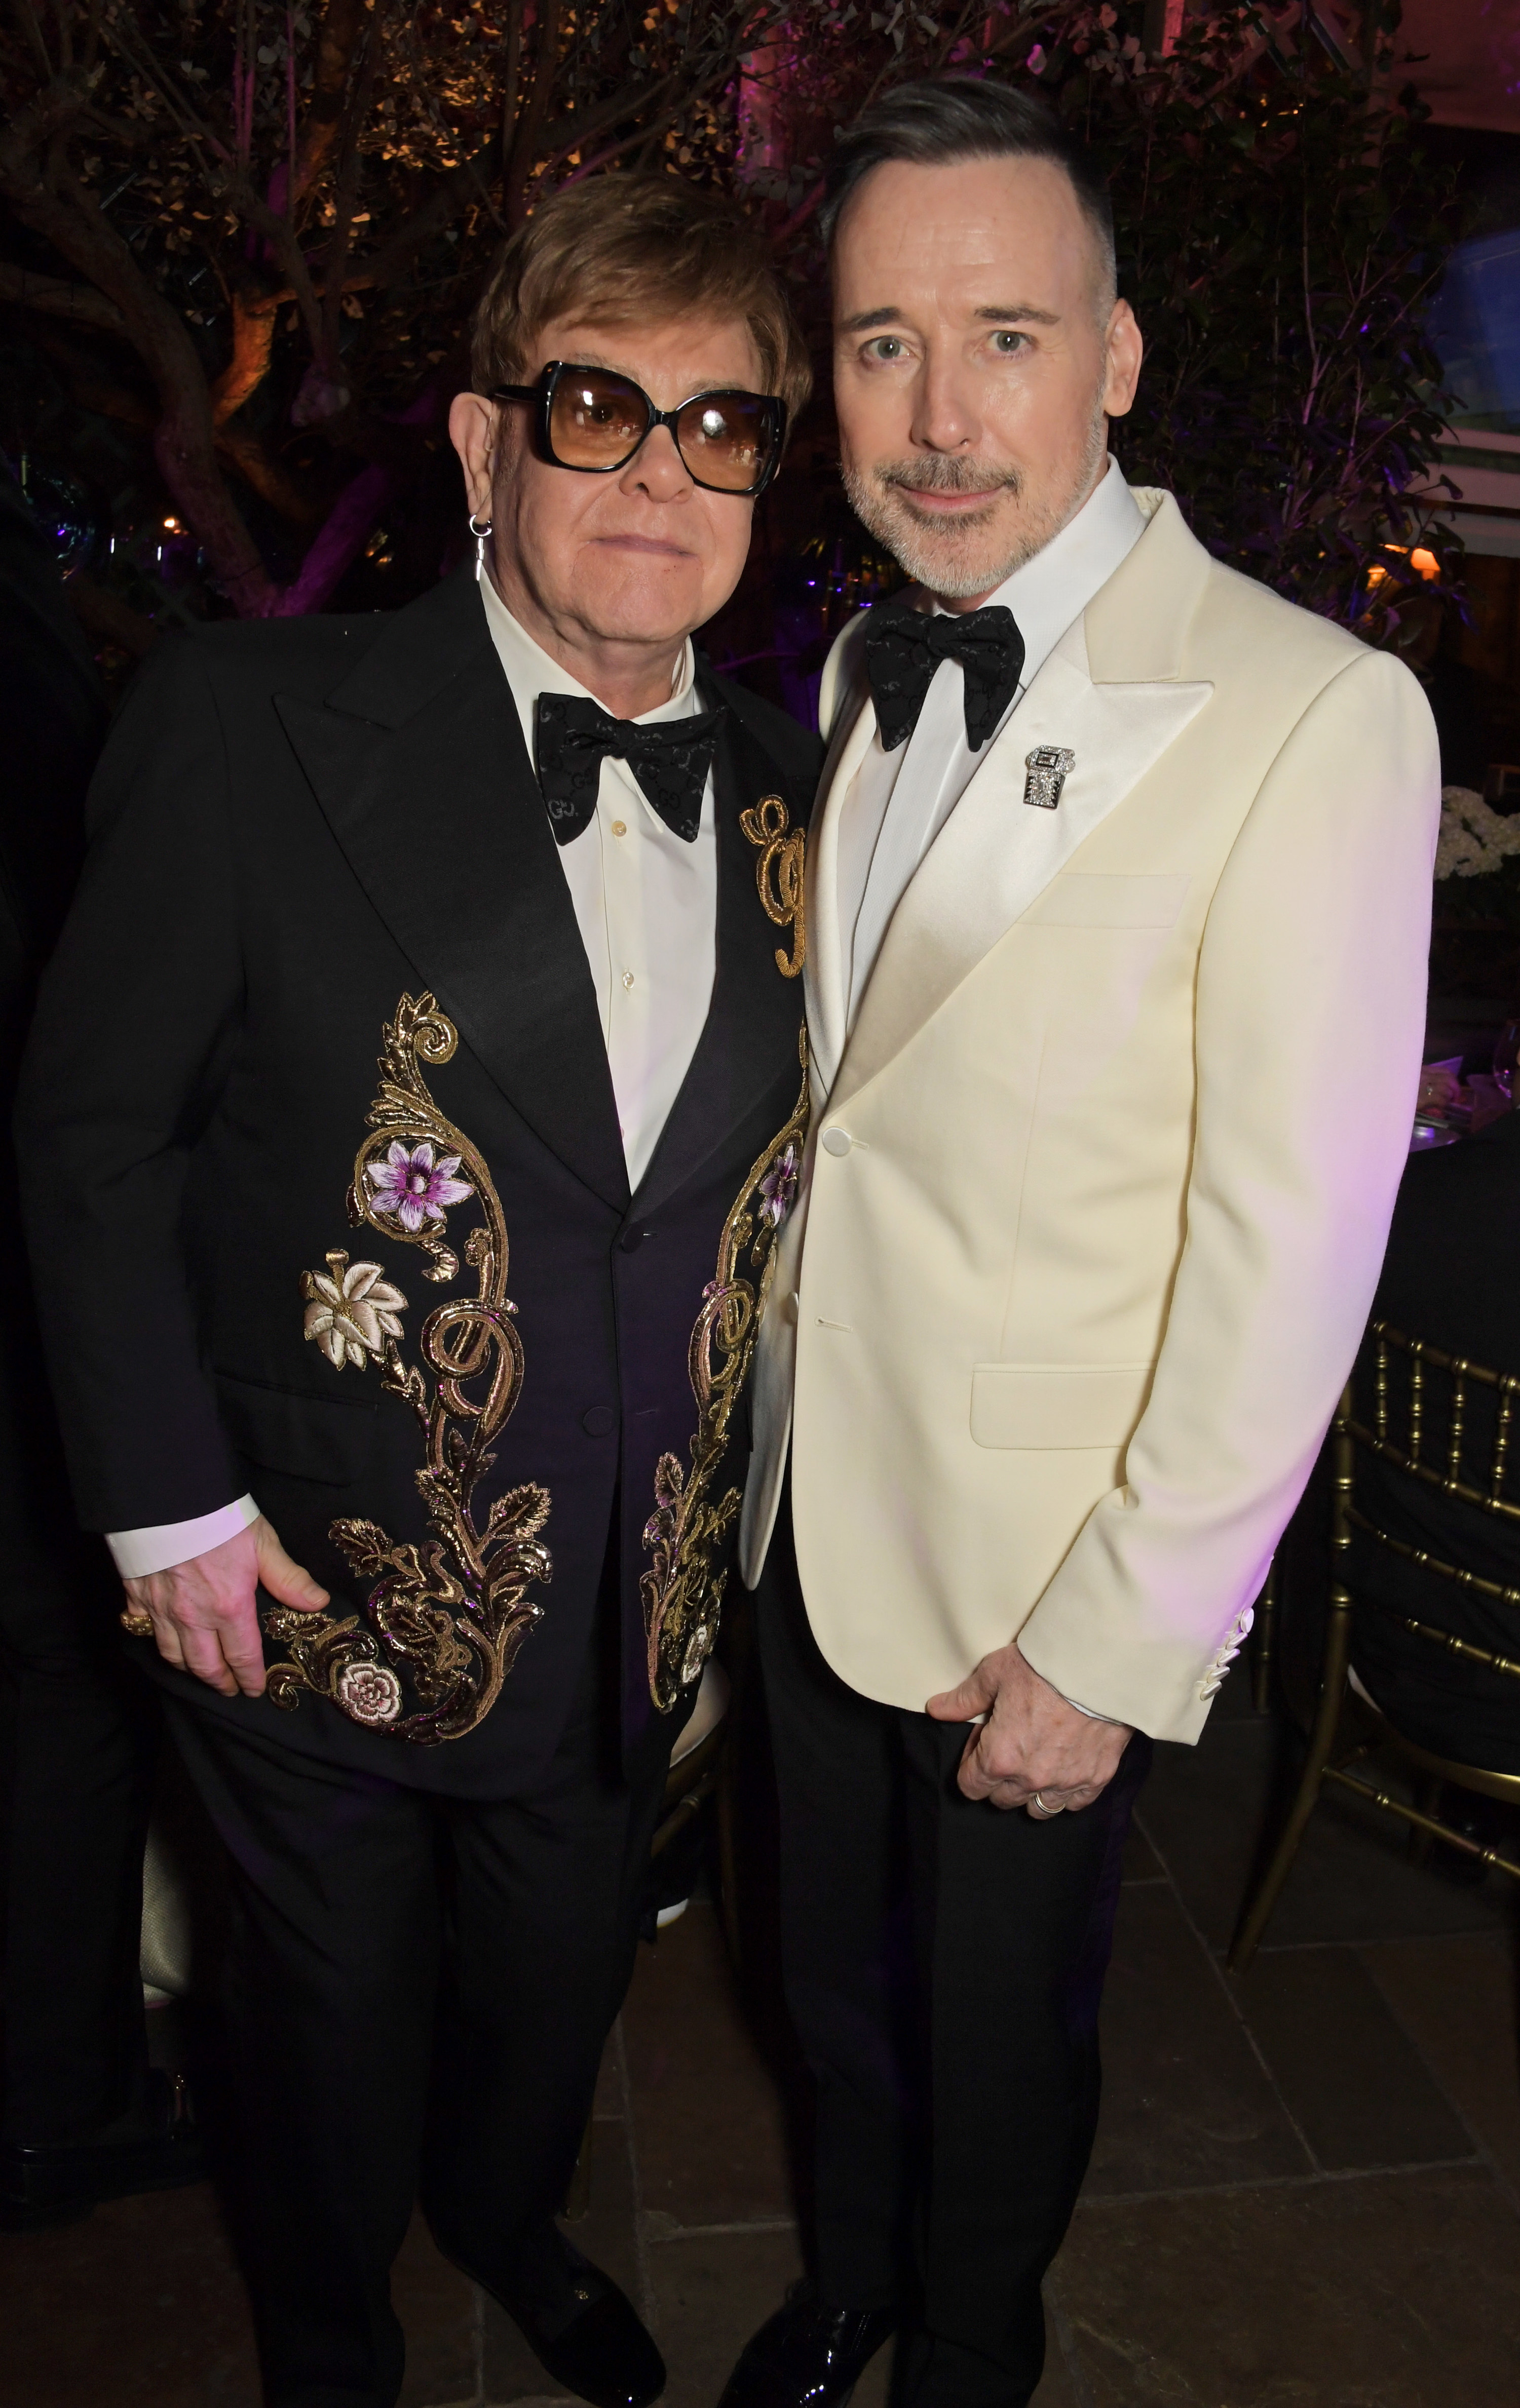 Sir Elton John and David Furnish attend a special event hosted by The Caring Family Foundation to benefit the Elton John AIDS Foundation